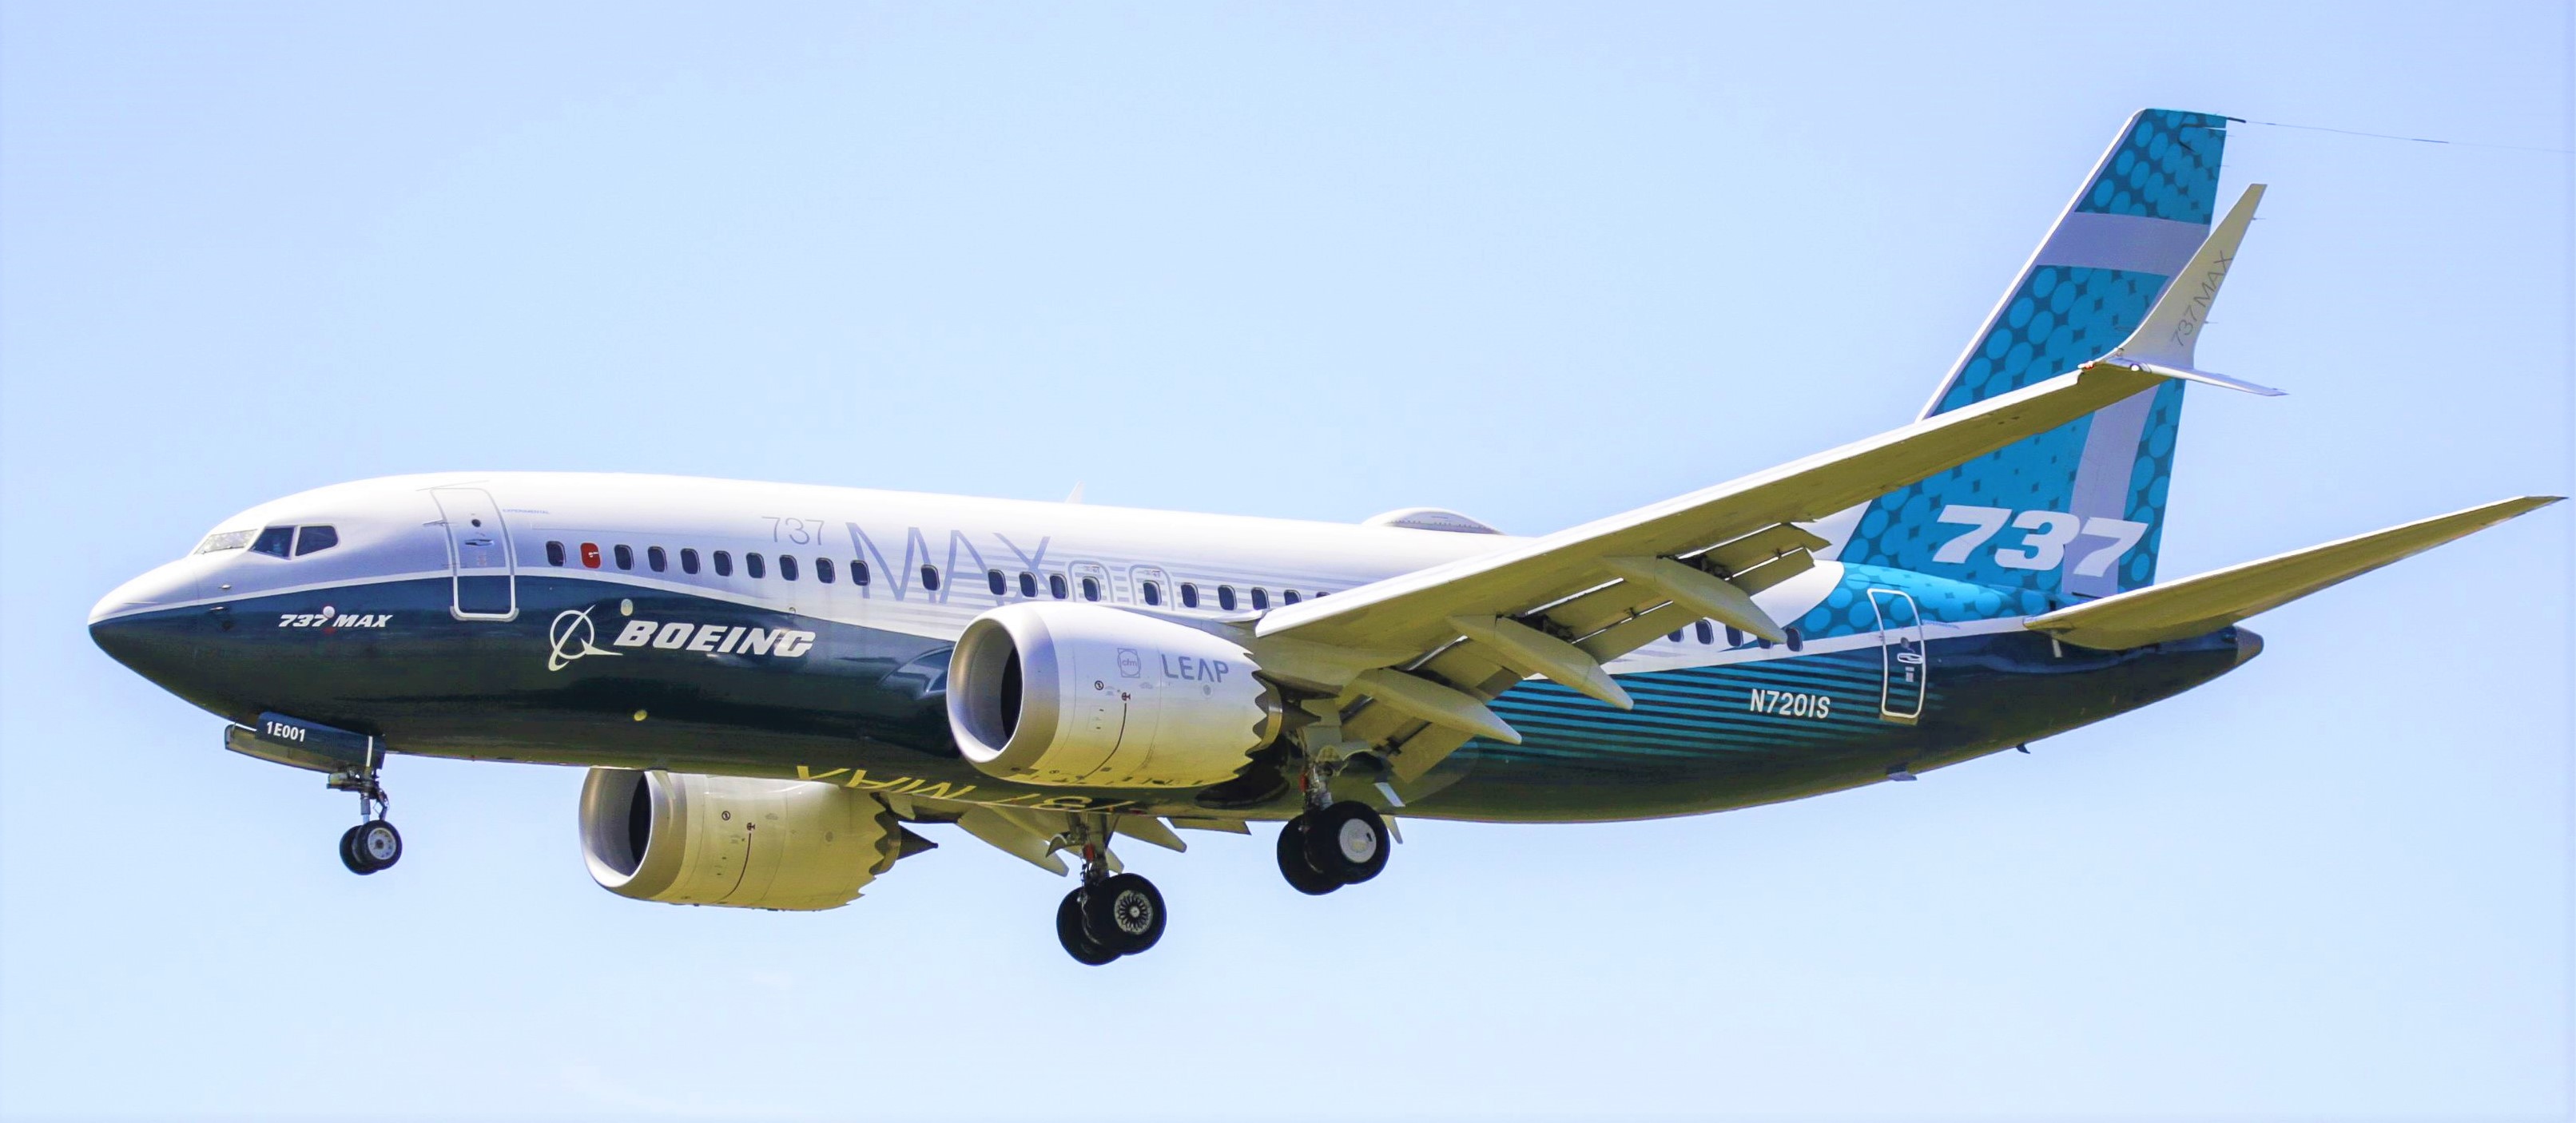 The Story - B737 Max  Electrical  issue hounds Boeing  as latest as Today,  what was the  wiring  (EWIS) issue during re-certification of  Max  last year ?